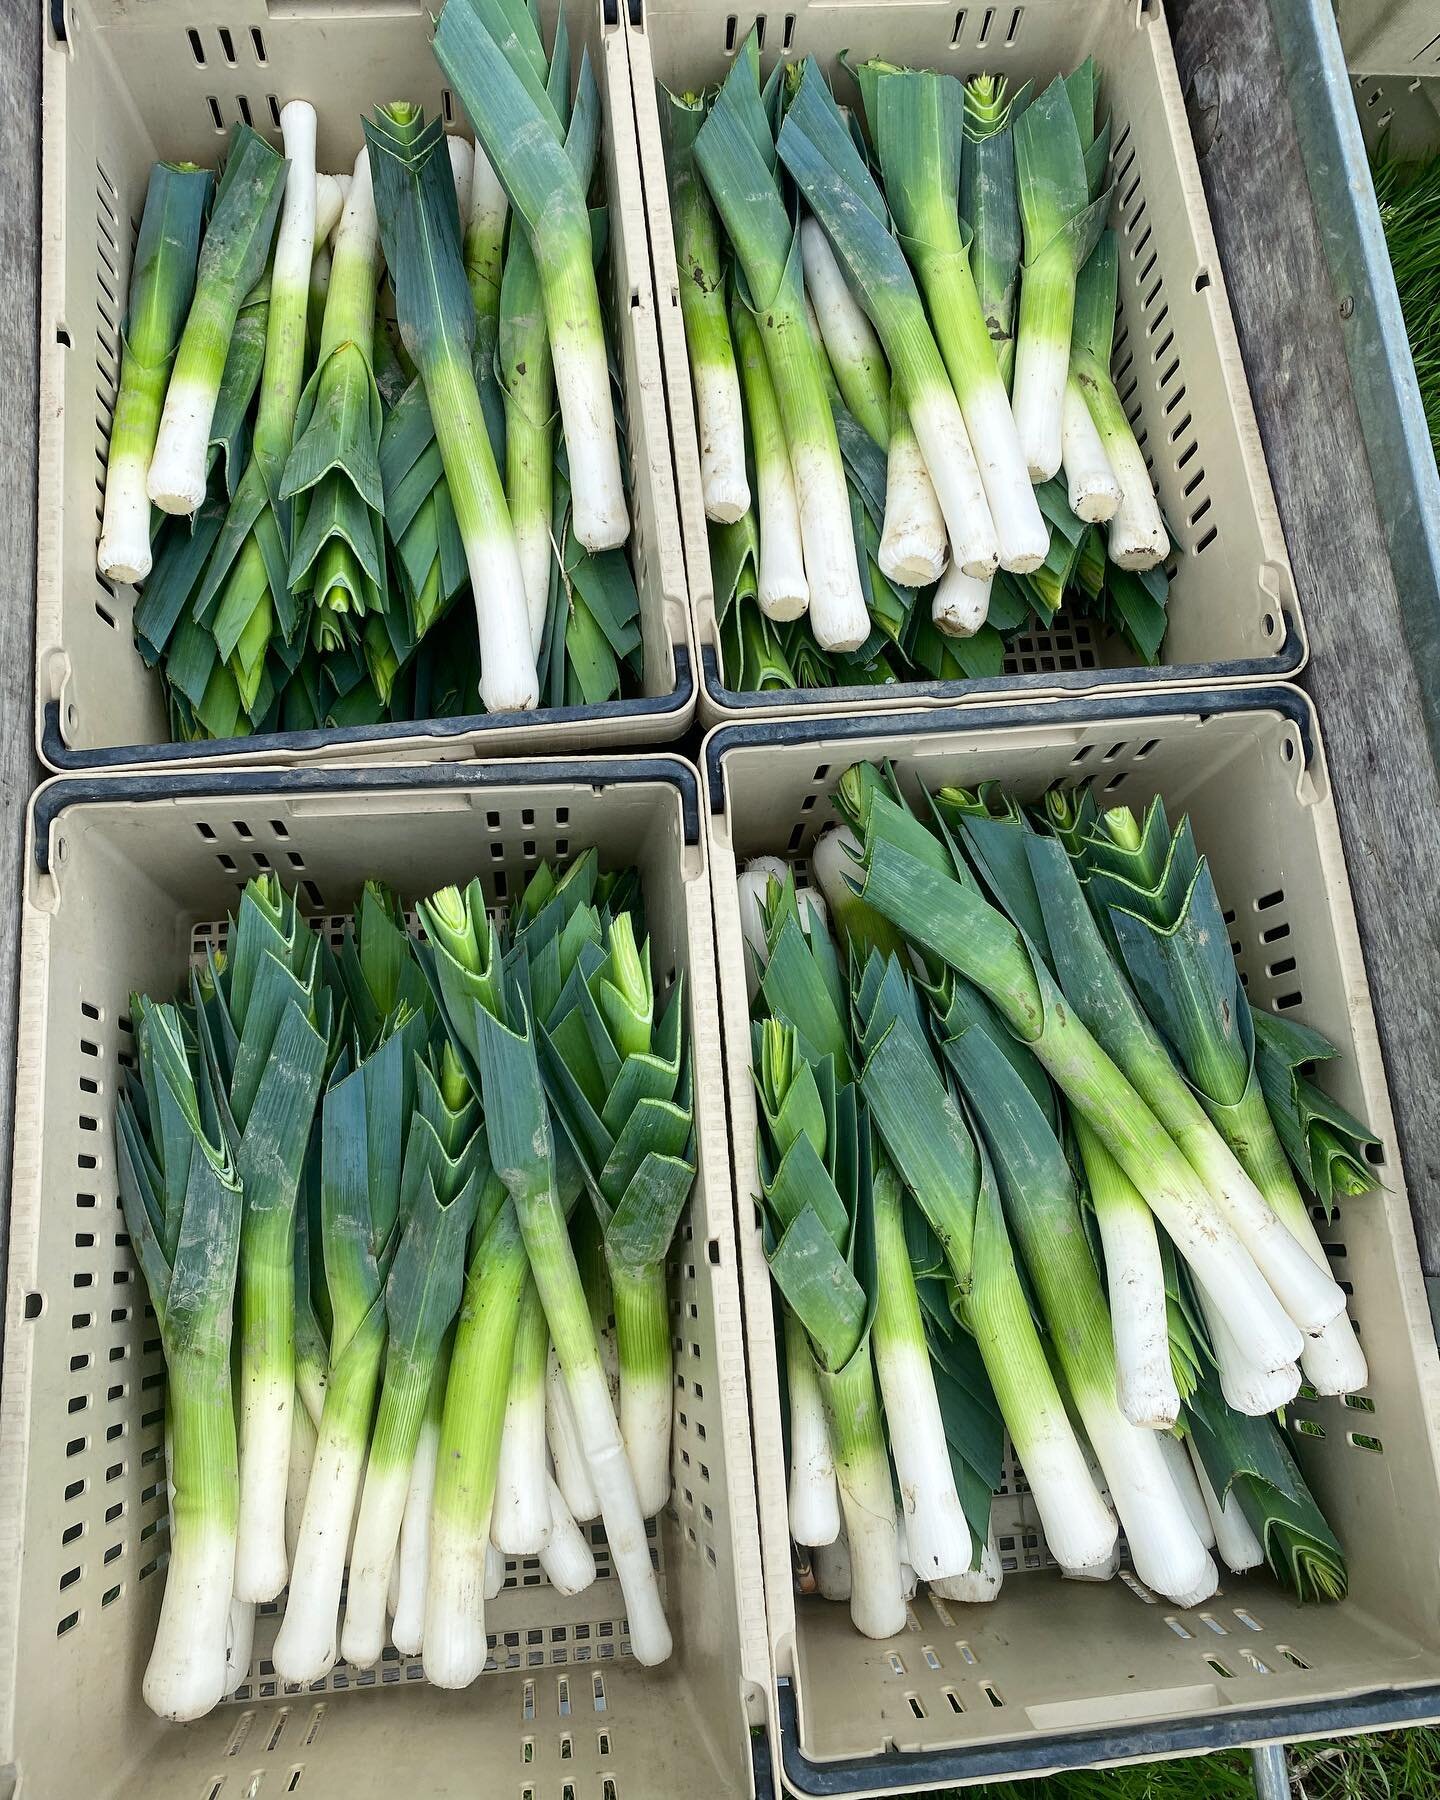 She&rsquo;s still got it! ⚡️

Find our overwintered leeks in the first @snovalleycoop spring CSA boxes of the season!